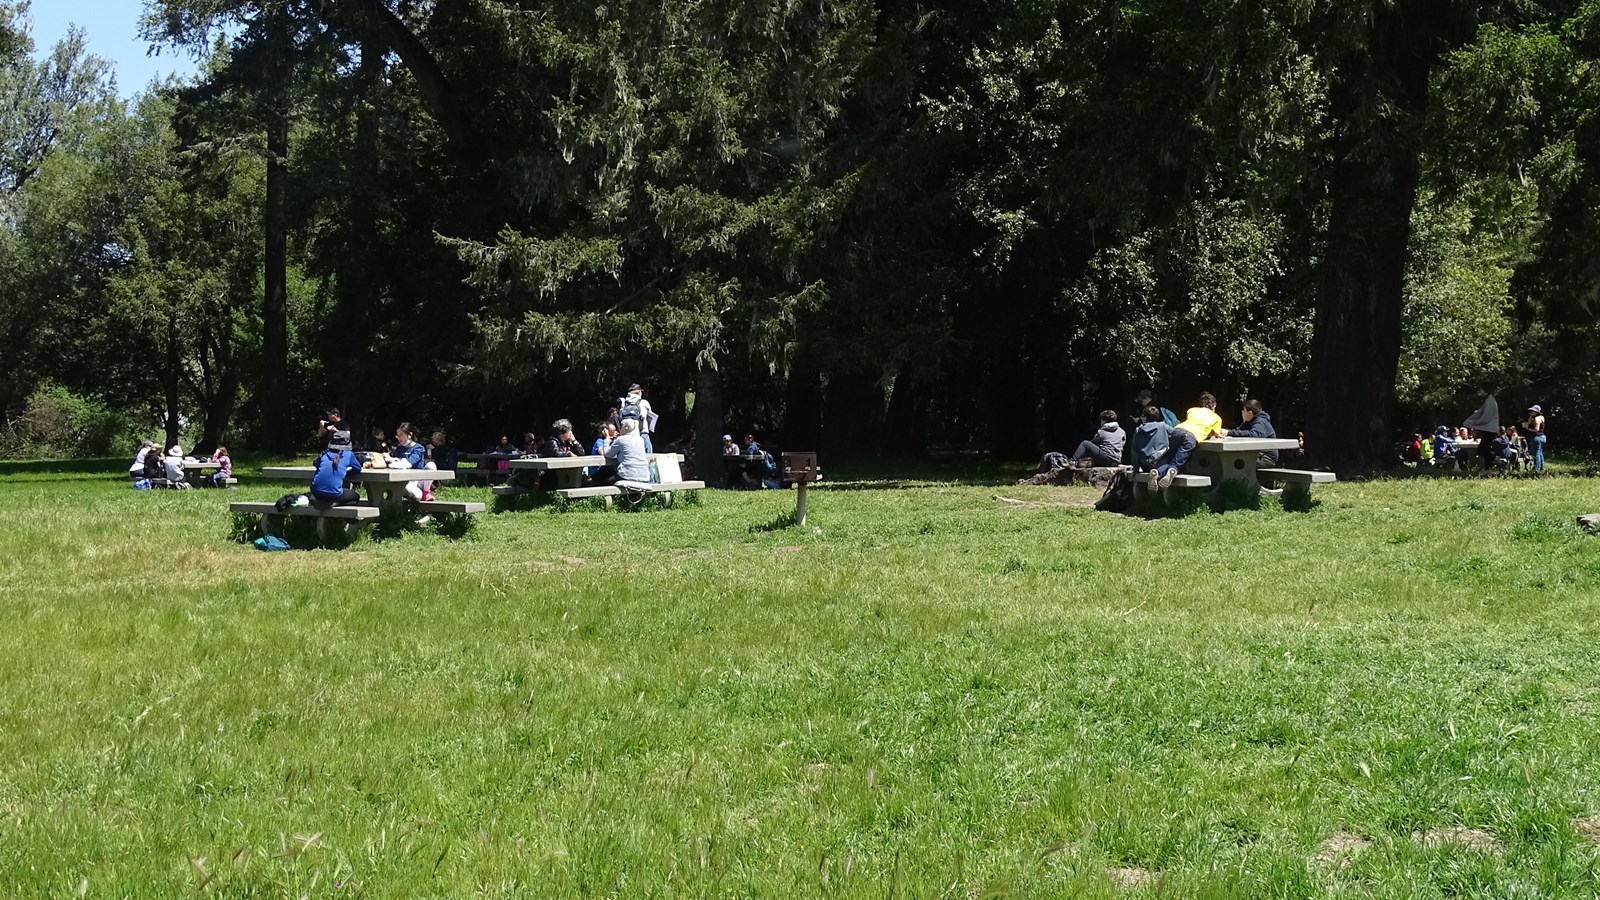 Picnickers eating lunch at picnic tables in a meadow near some tall trees.